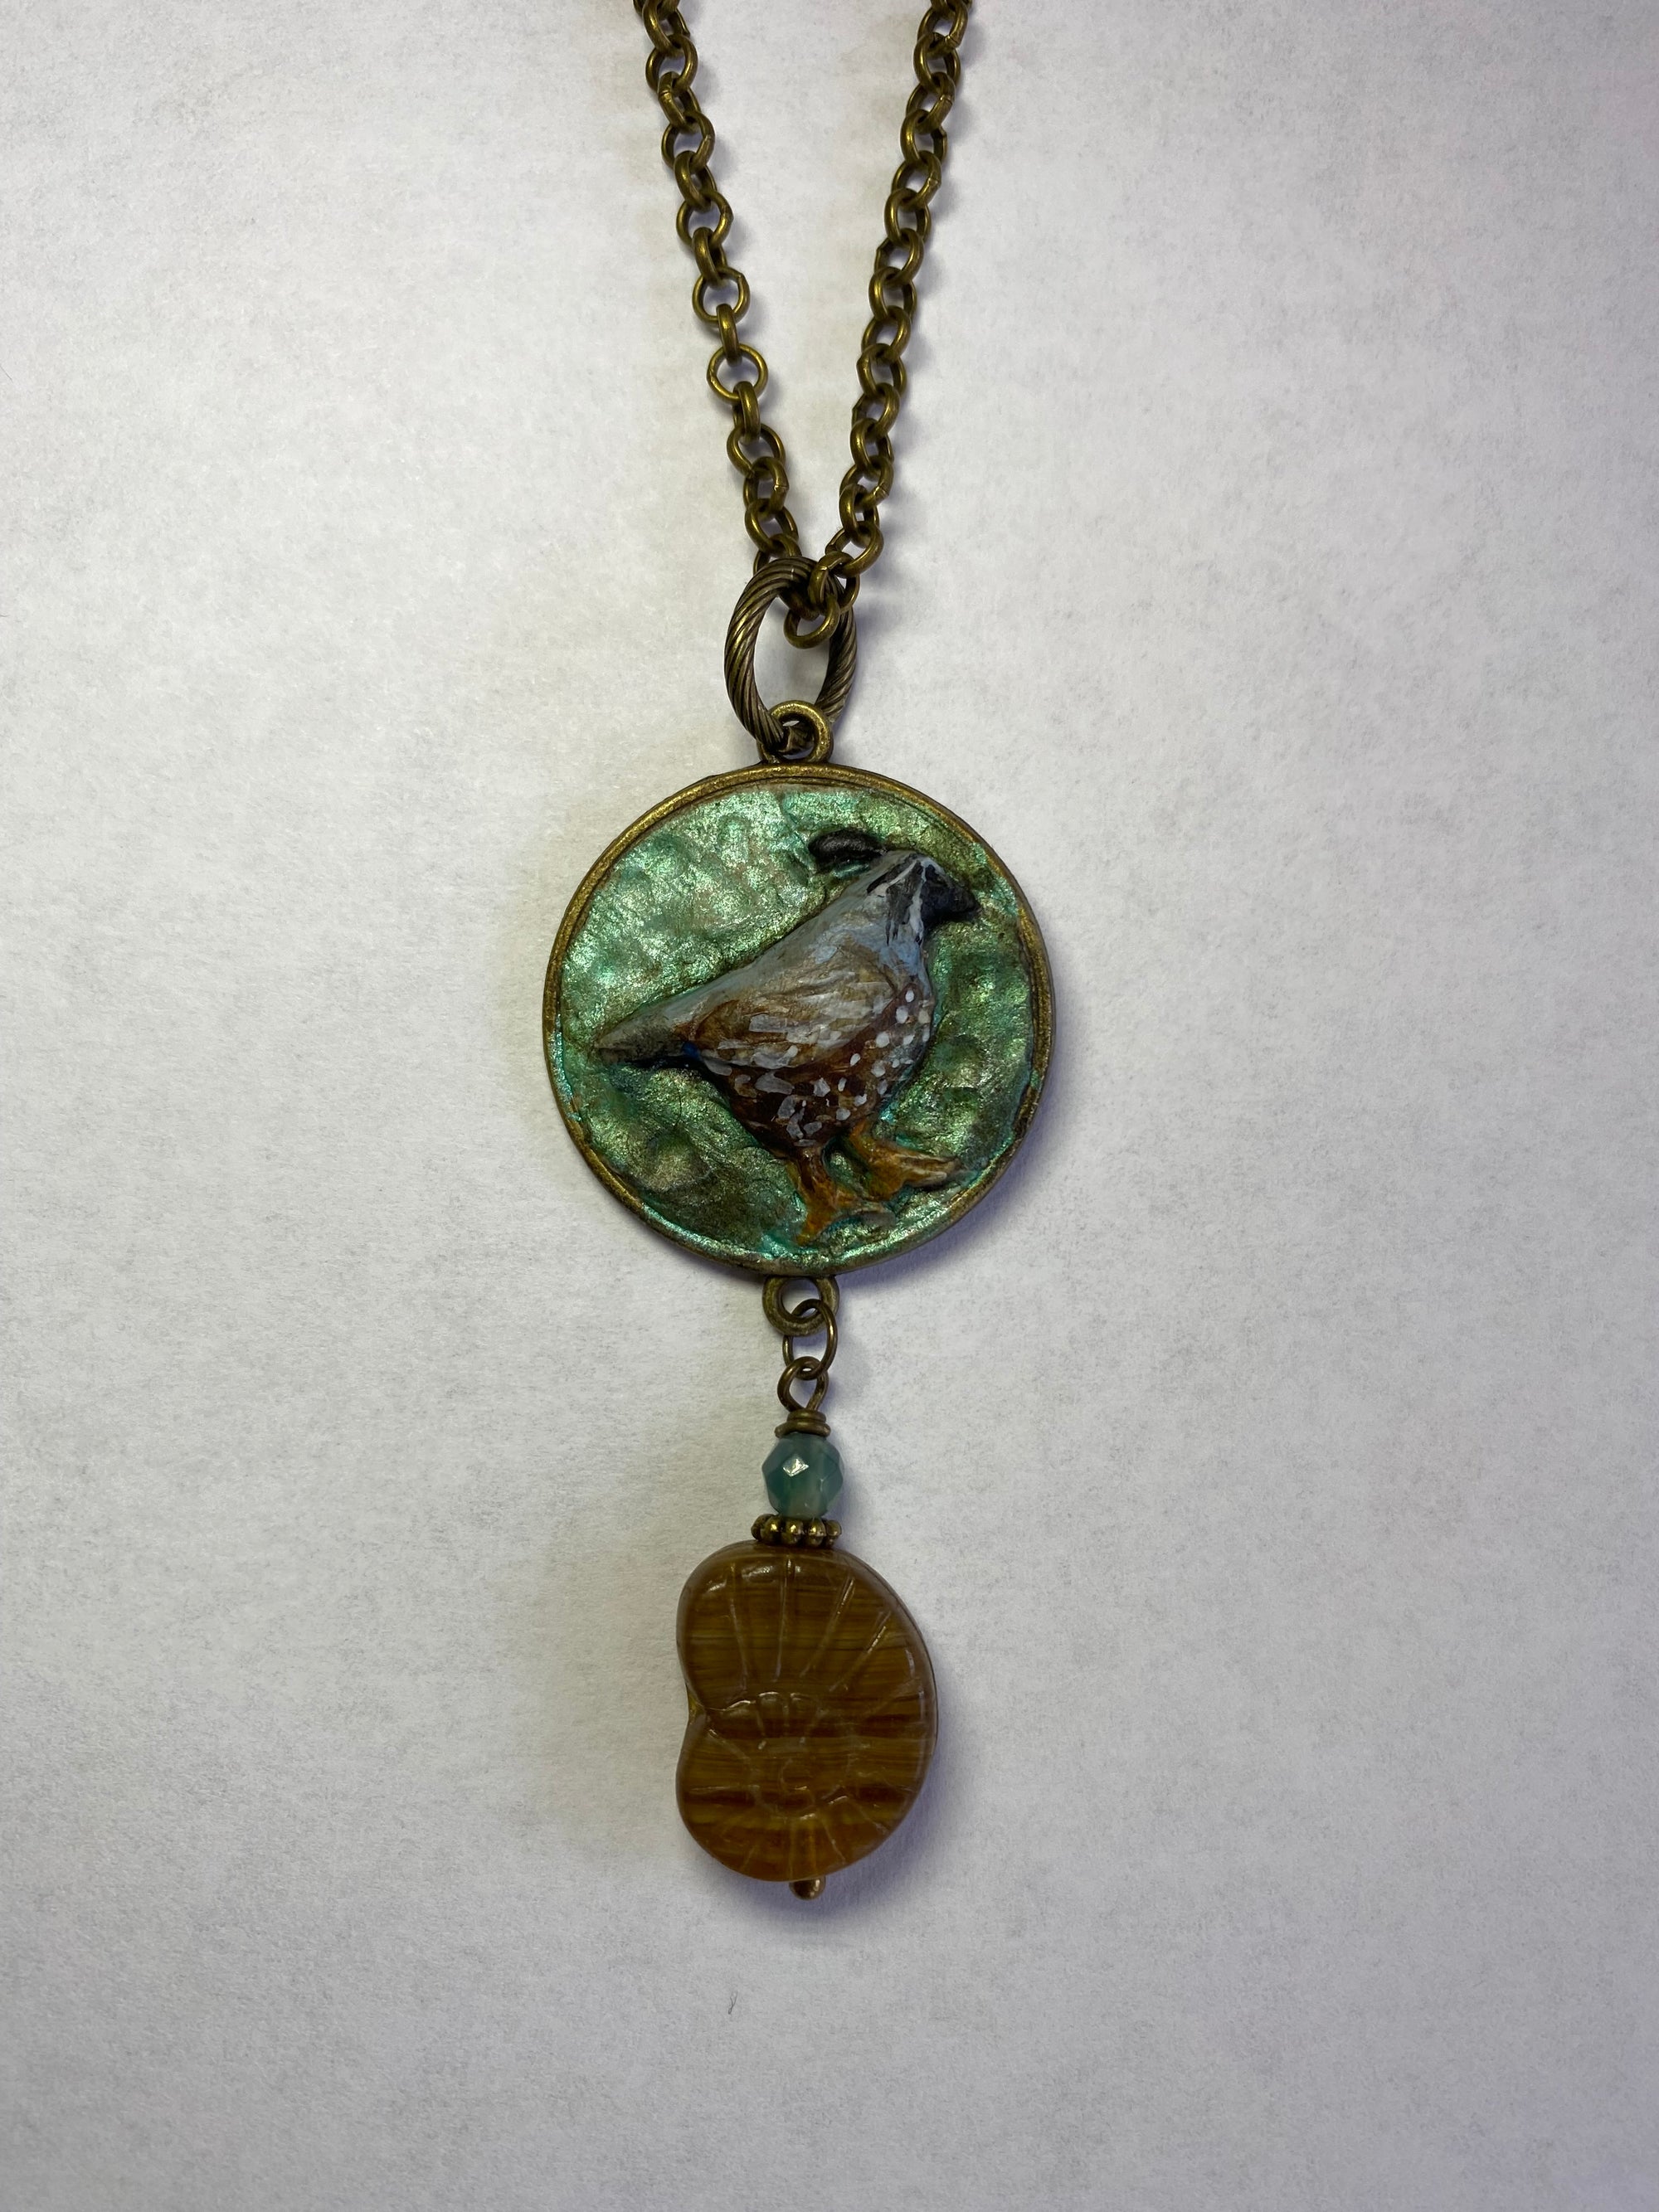 Necklace - Quail with Snail